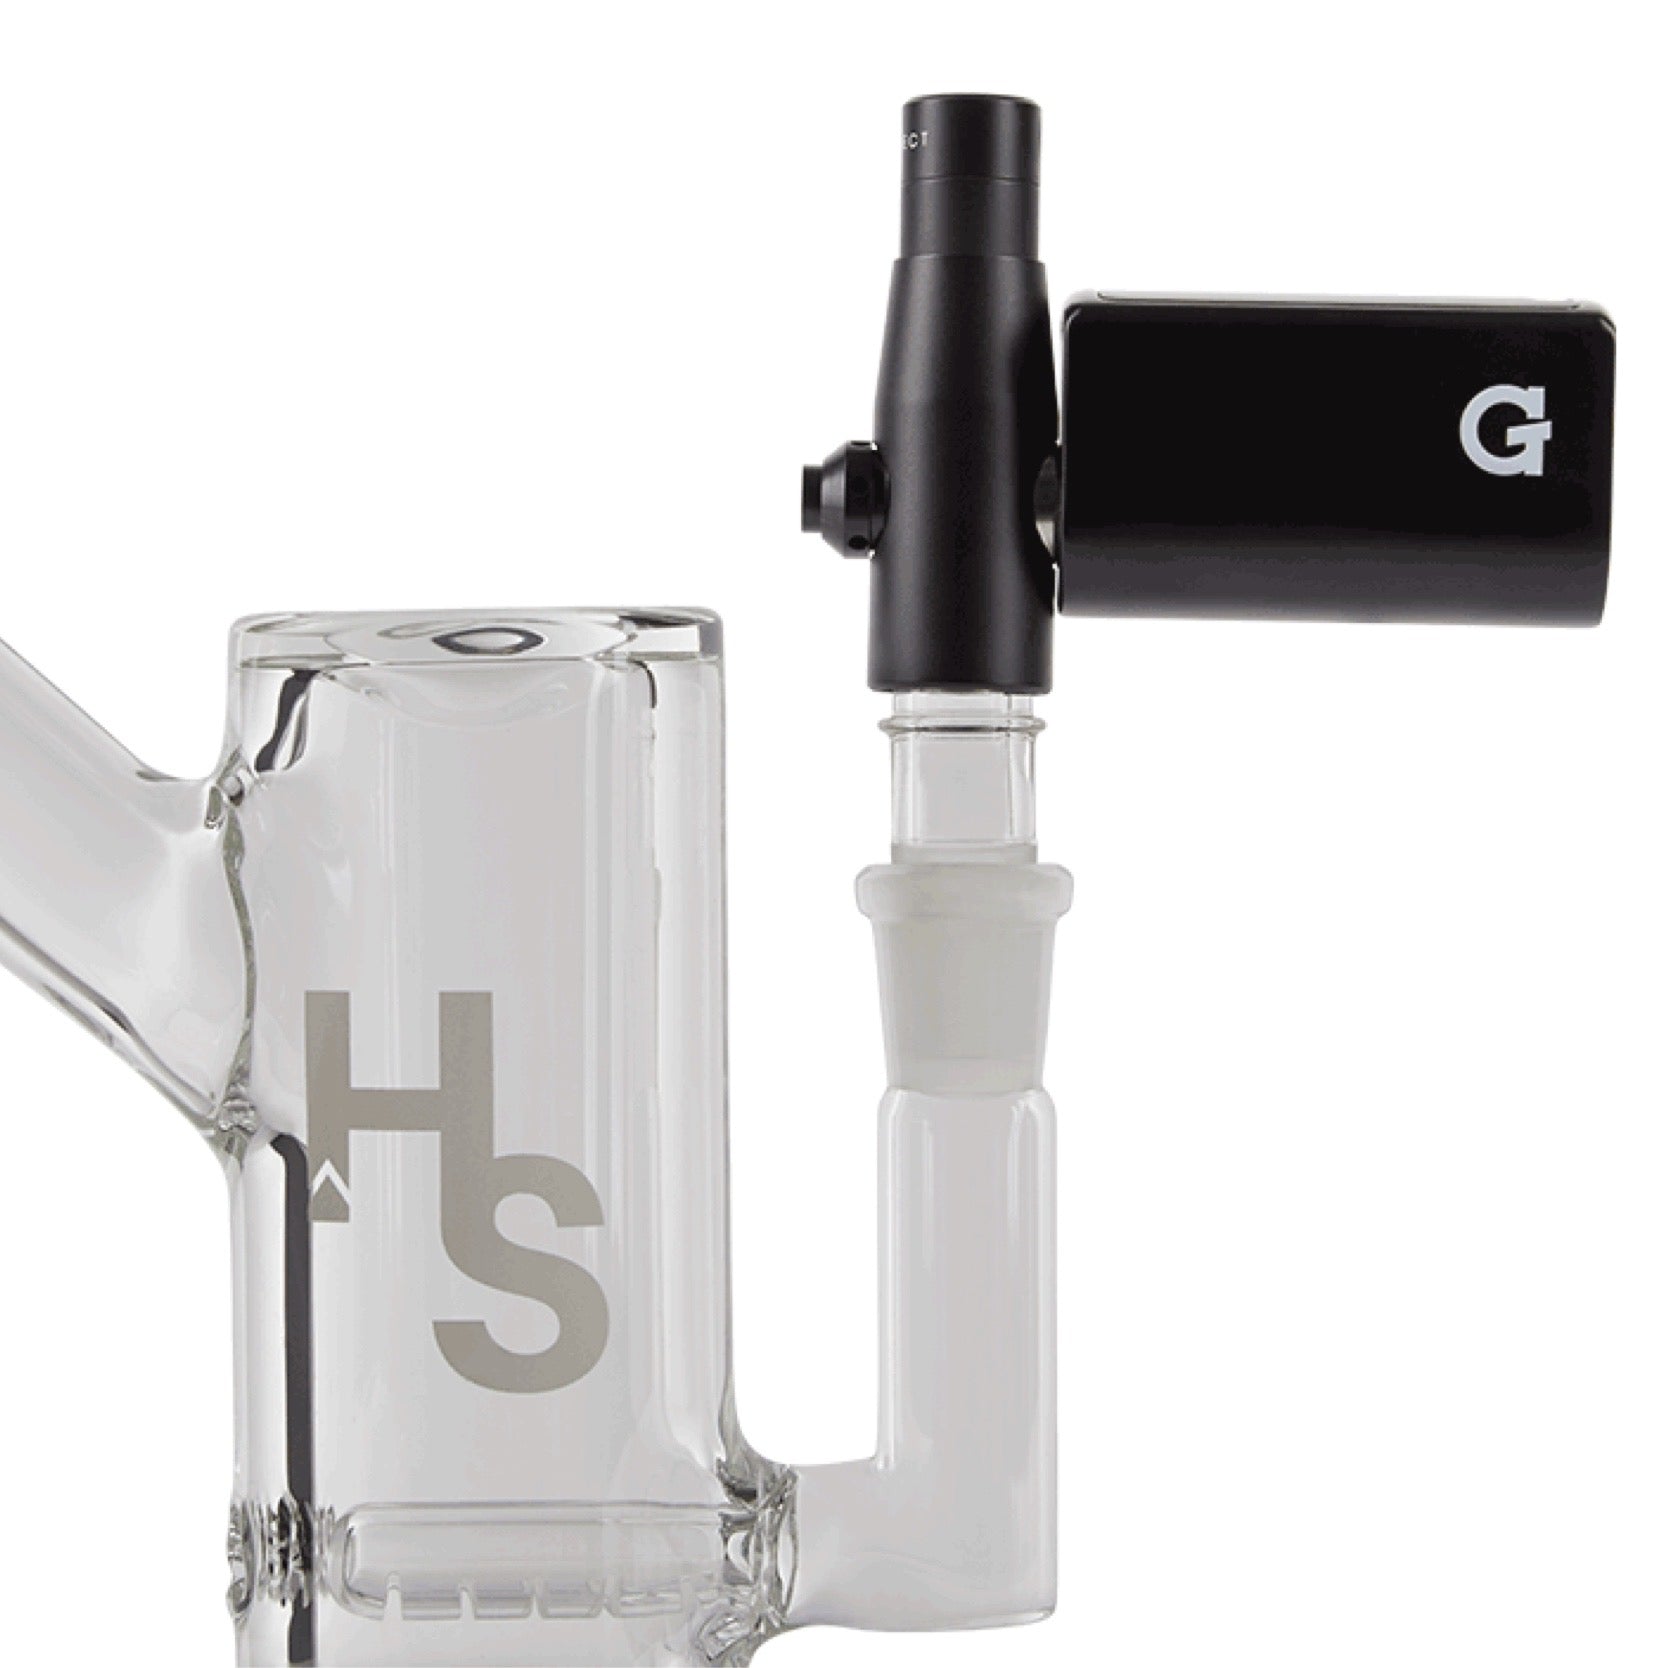 Higher Standards Rig x G Pen Connect Bundle by Mission Dispensary | Mission Dispensary